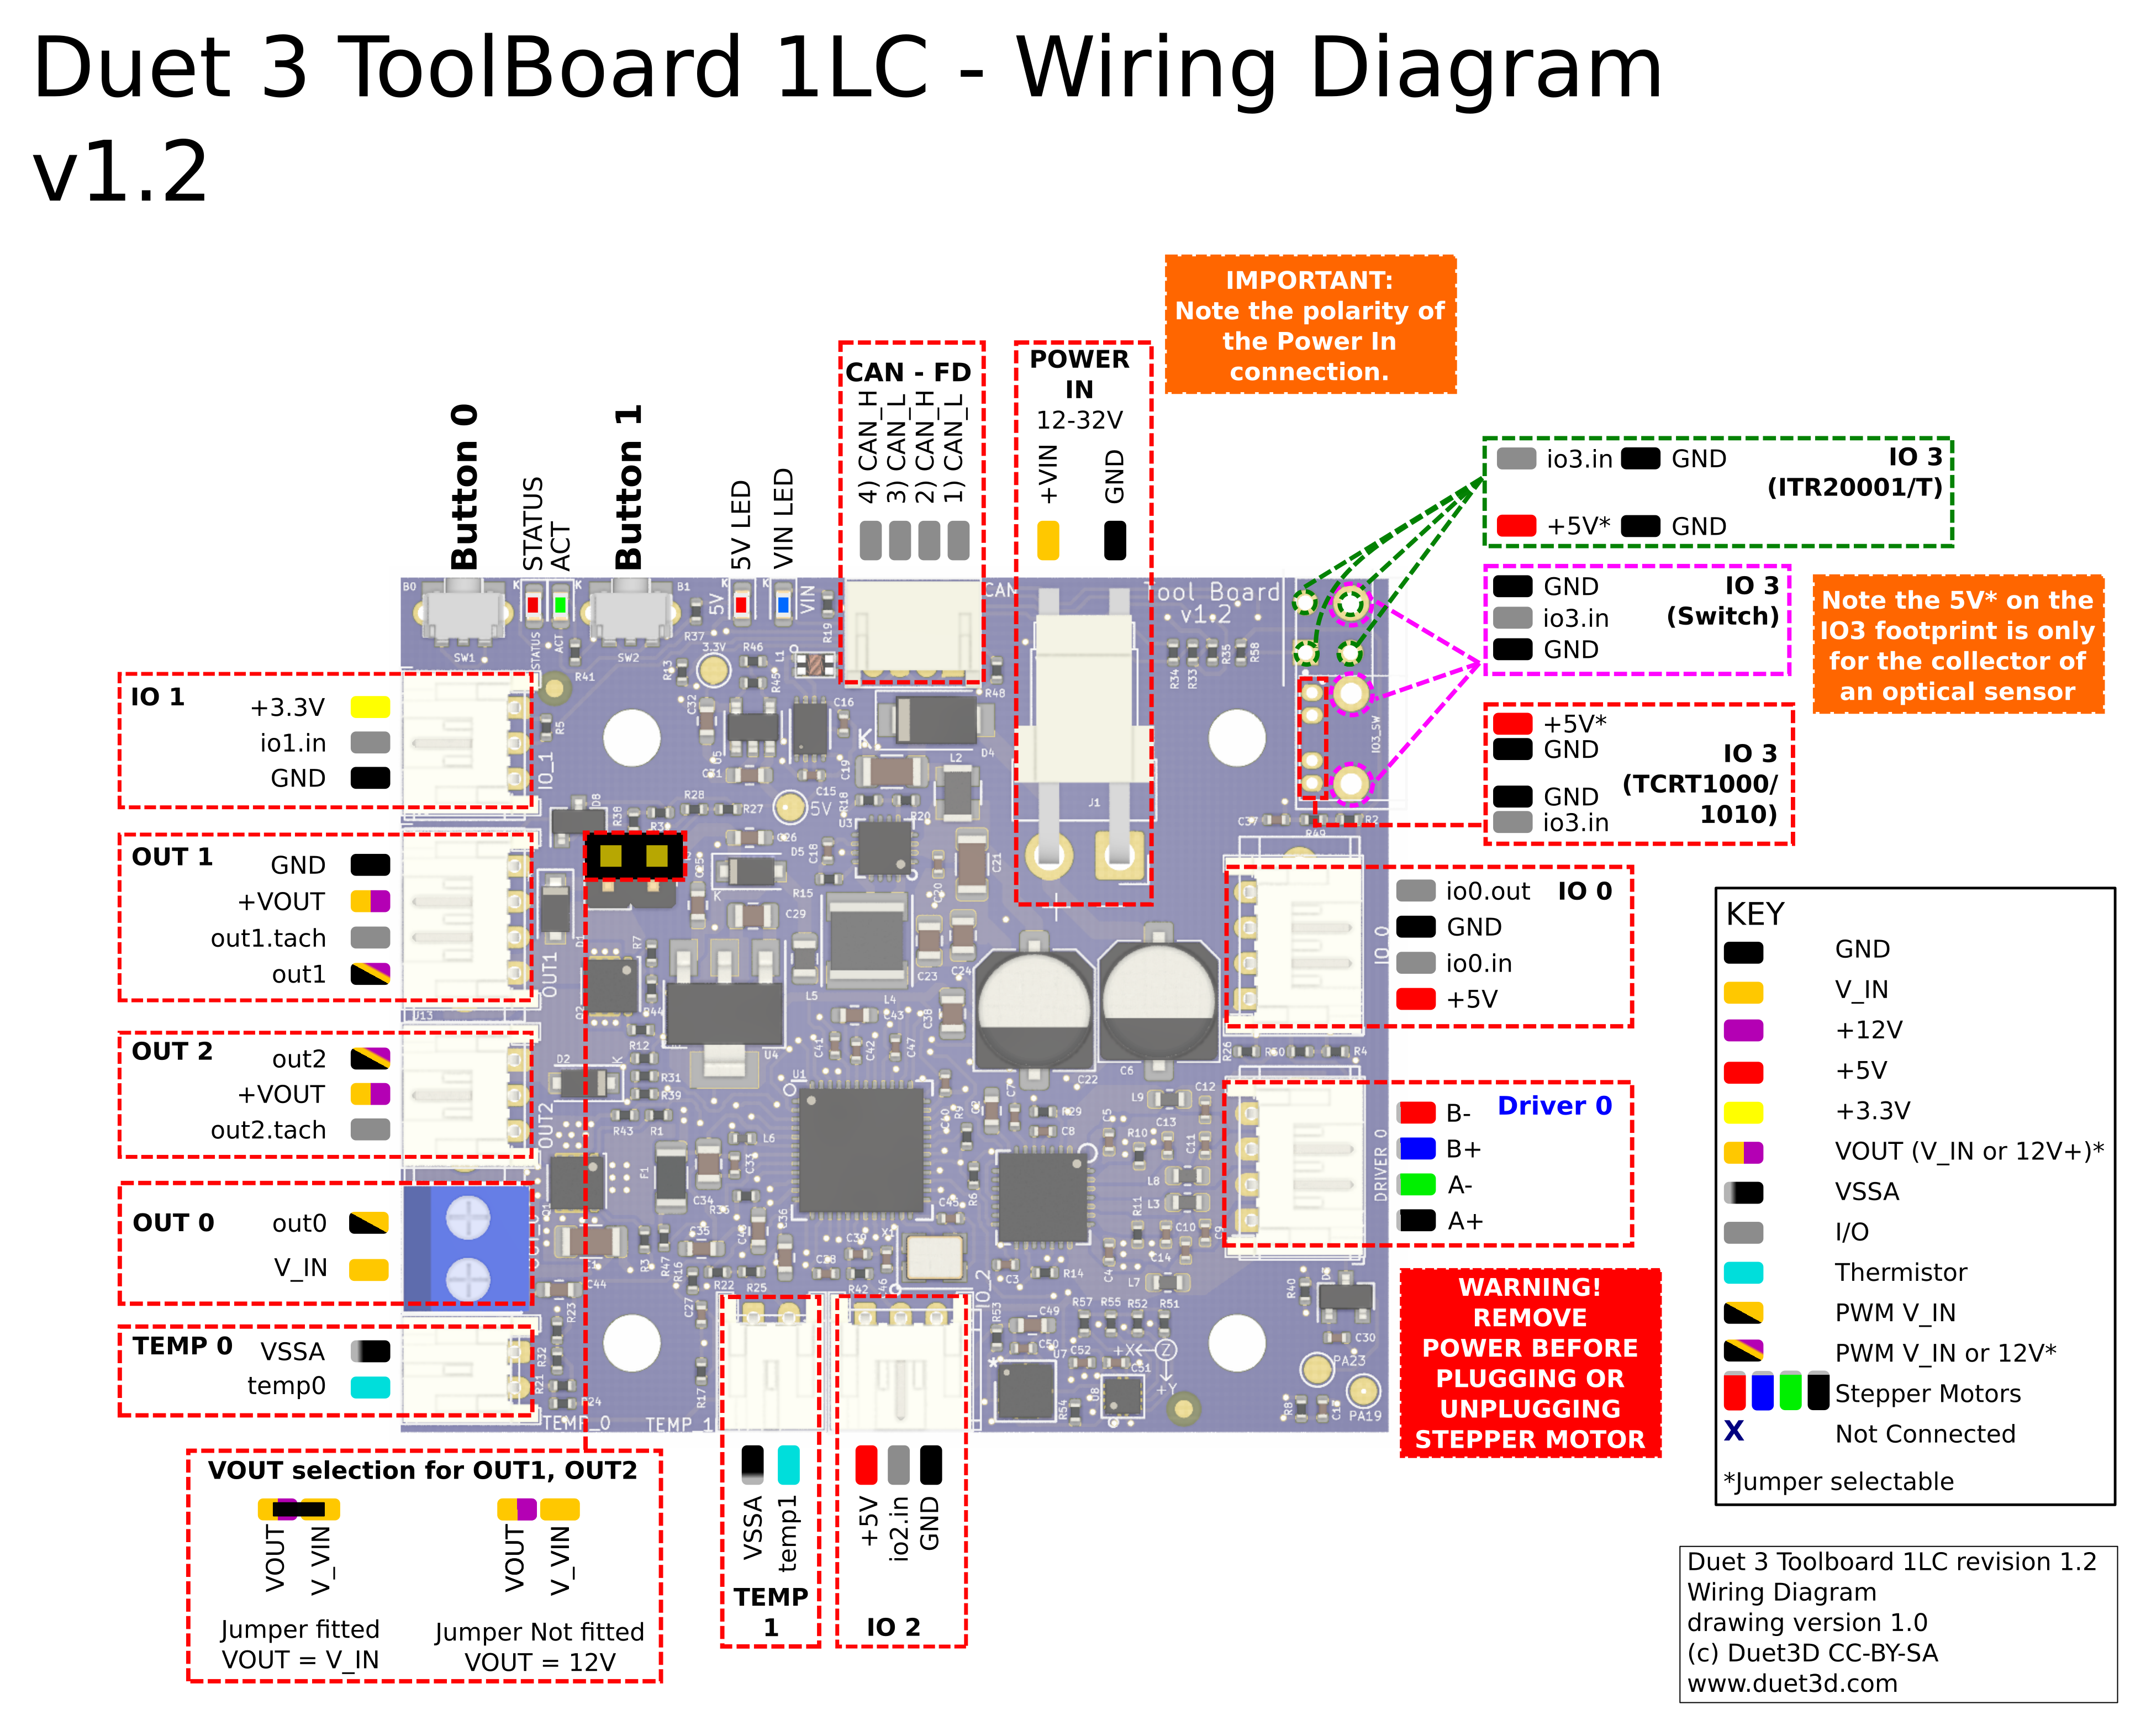 diagram showing the pinout for each of the headers on the Duet 3 toolboard 1LC v1.2